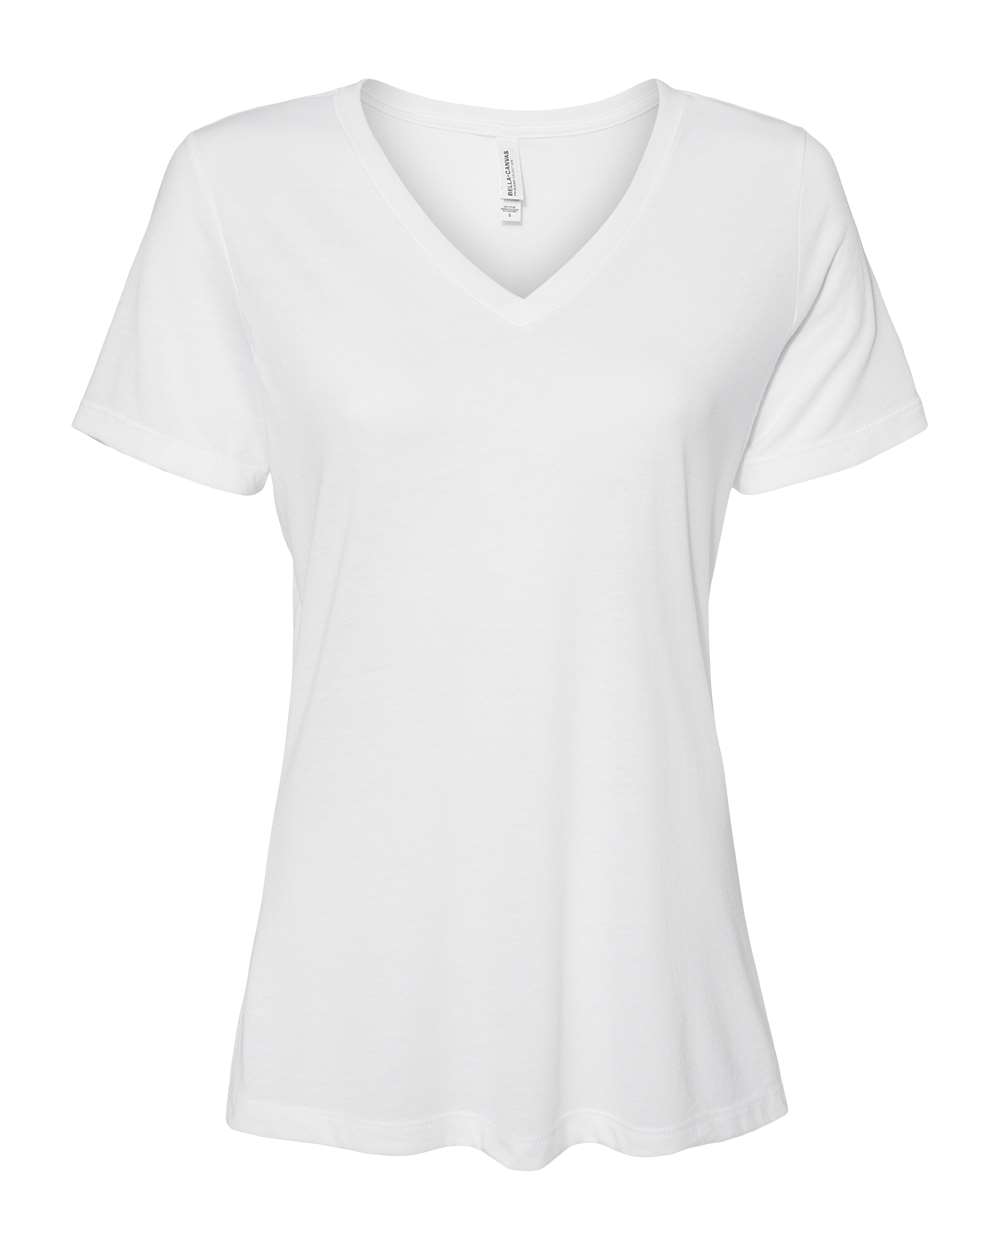 Bella + Canvas 6415 - Women's Relaxed Triblend Short Sleeve V-Neck Tee